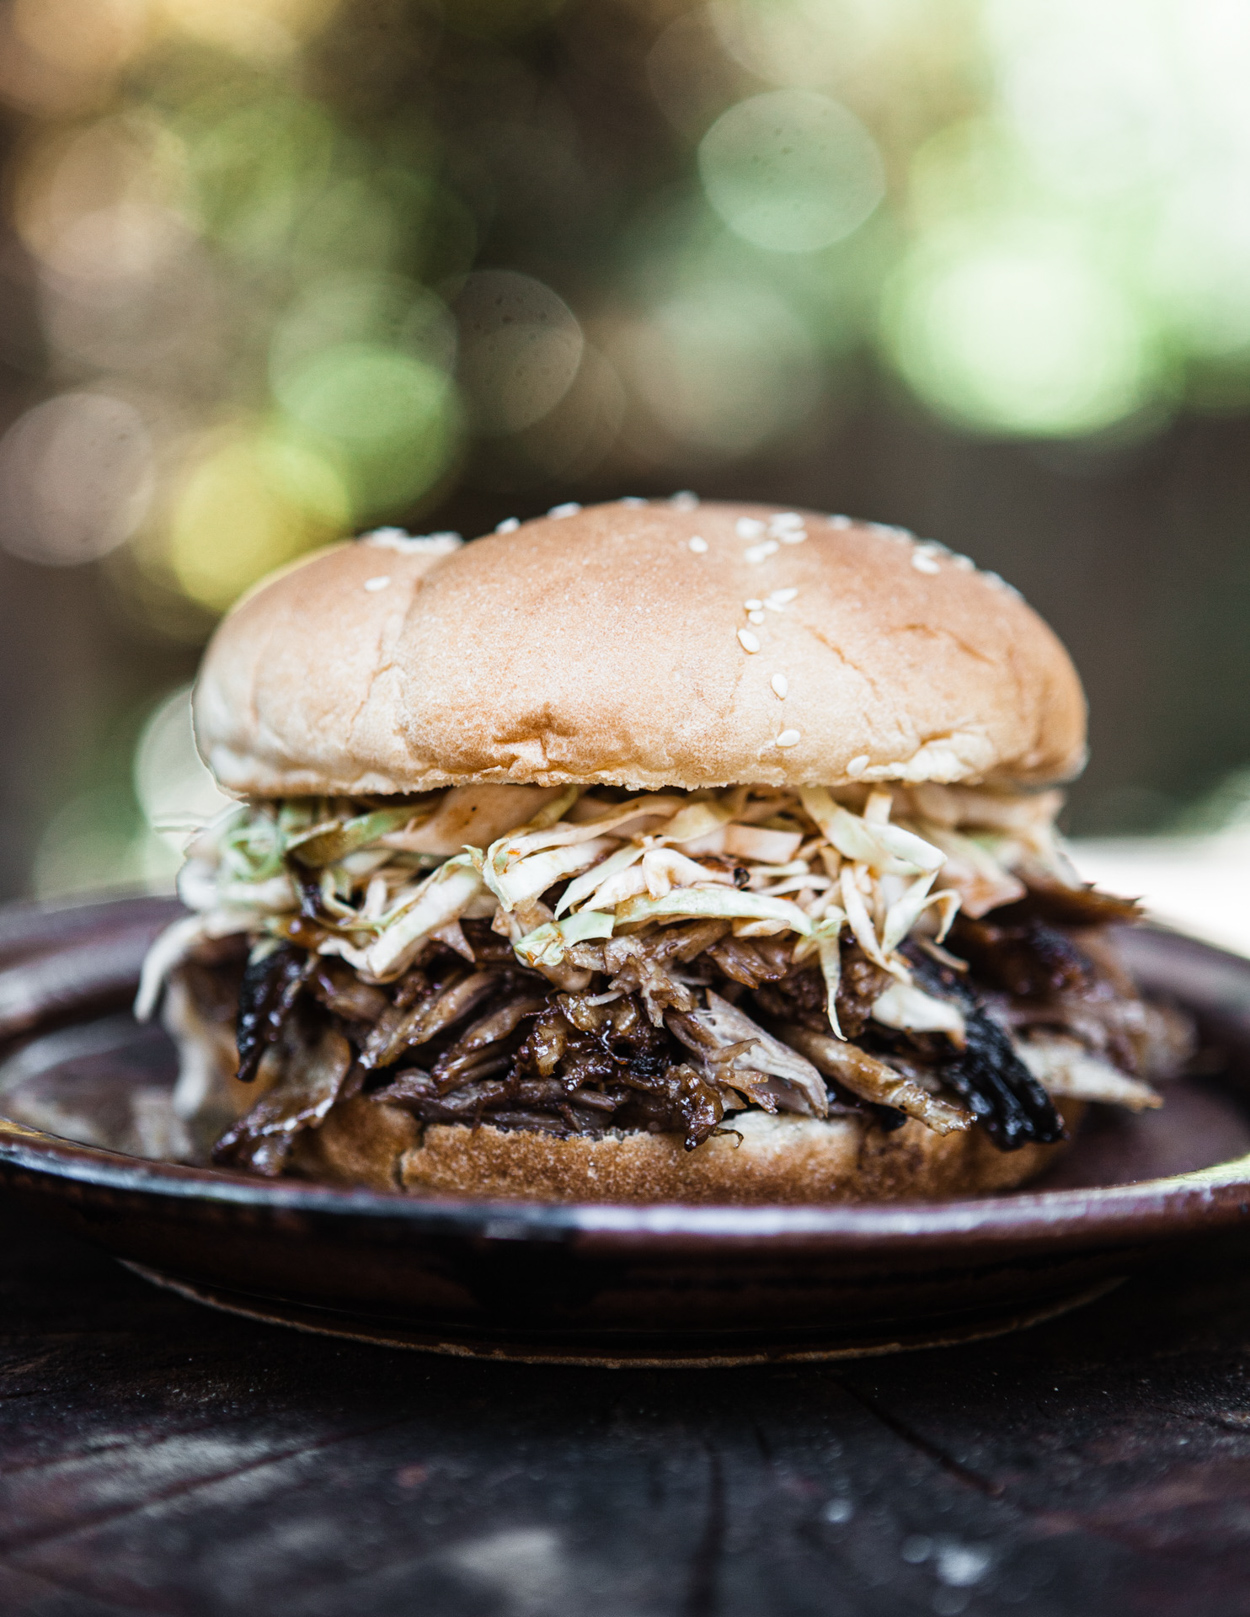 Los Angeles Food photographer - Grill Master Cookbook Pulled Pork  by Ray Kachatorian